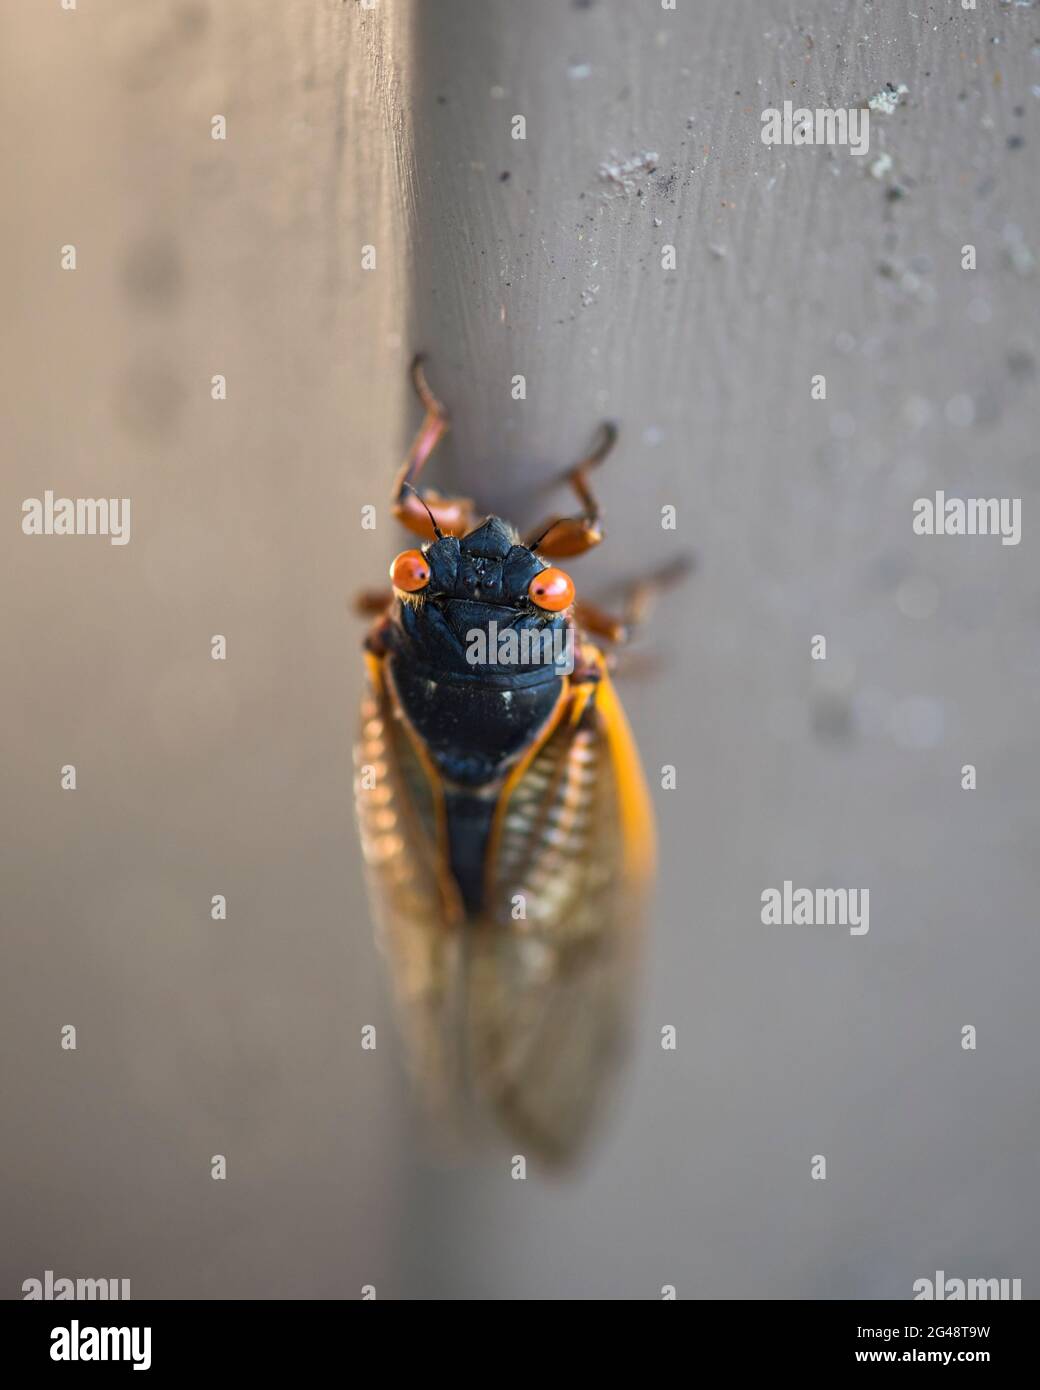 A periodical 17 year cicada on the side of a building Stock Photo